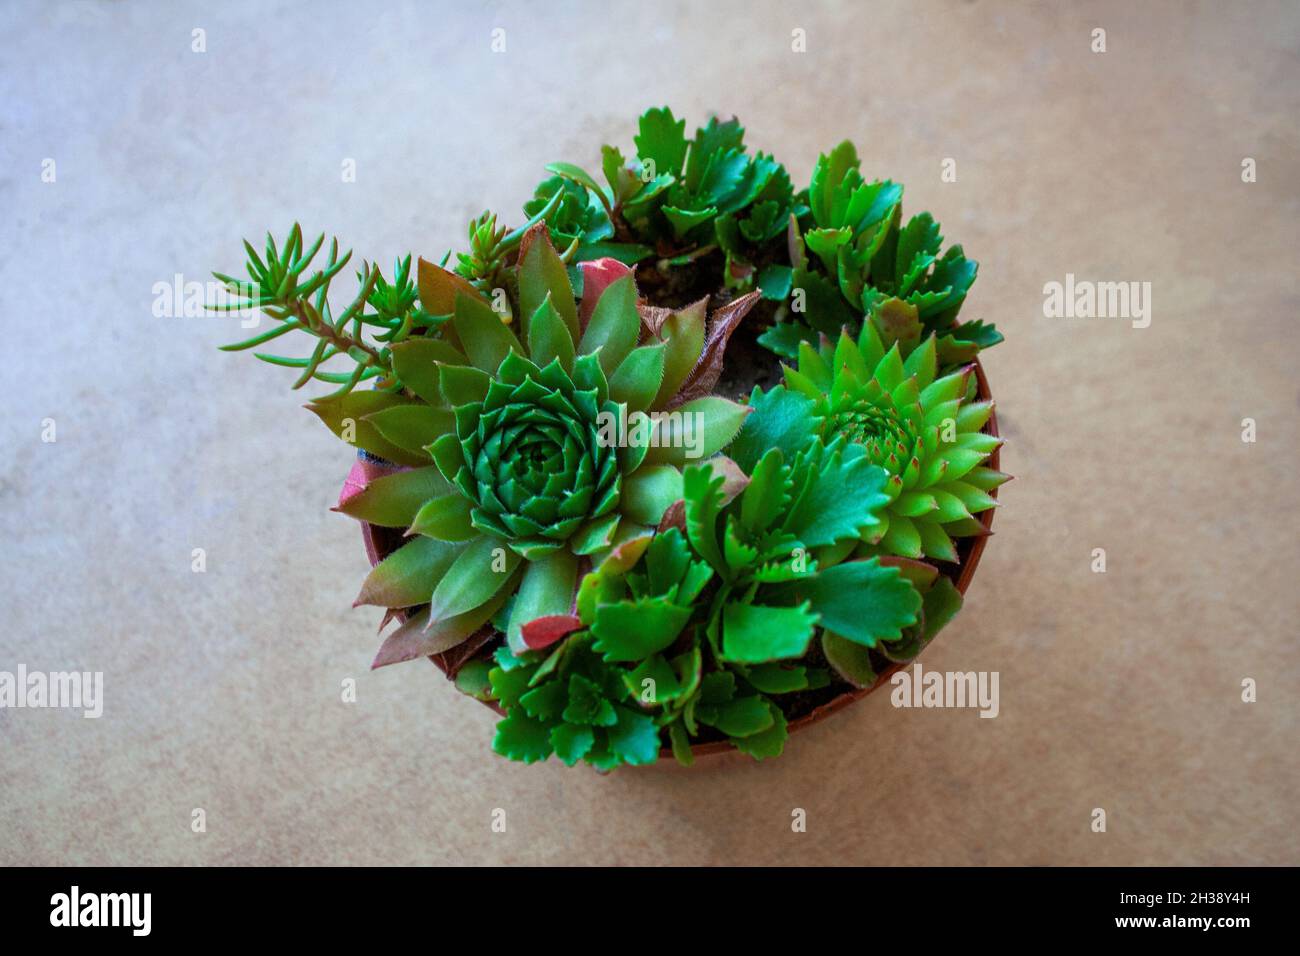 Succulent plants composition isolated on beige background from a high angle view Stock Photo